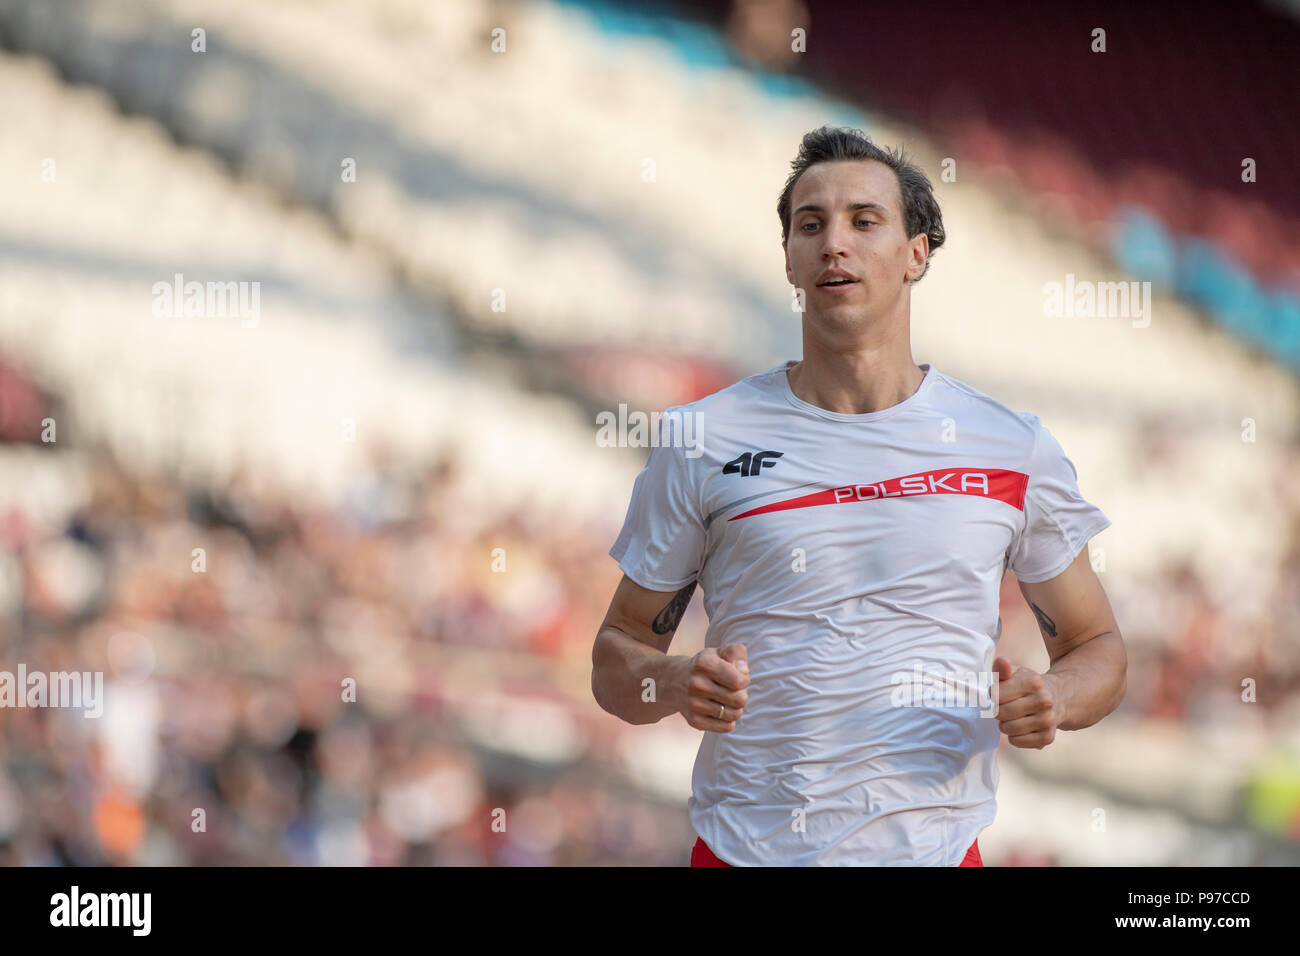 London, UK. 14th July 2018. Triple jump winner Karol Hoffman (POL) warms up before the Athletics World Cup at the London Stadium, London, Great Britiain, on 14 July 2018. Credit: Andrew Peat/Alamy Live News Stock Photo